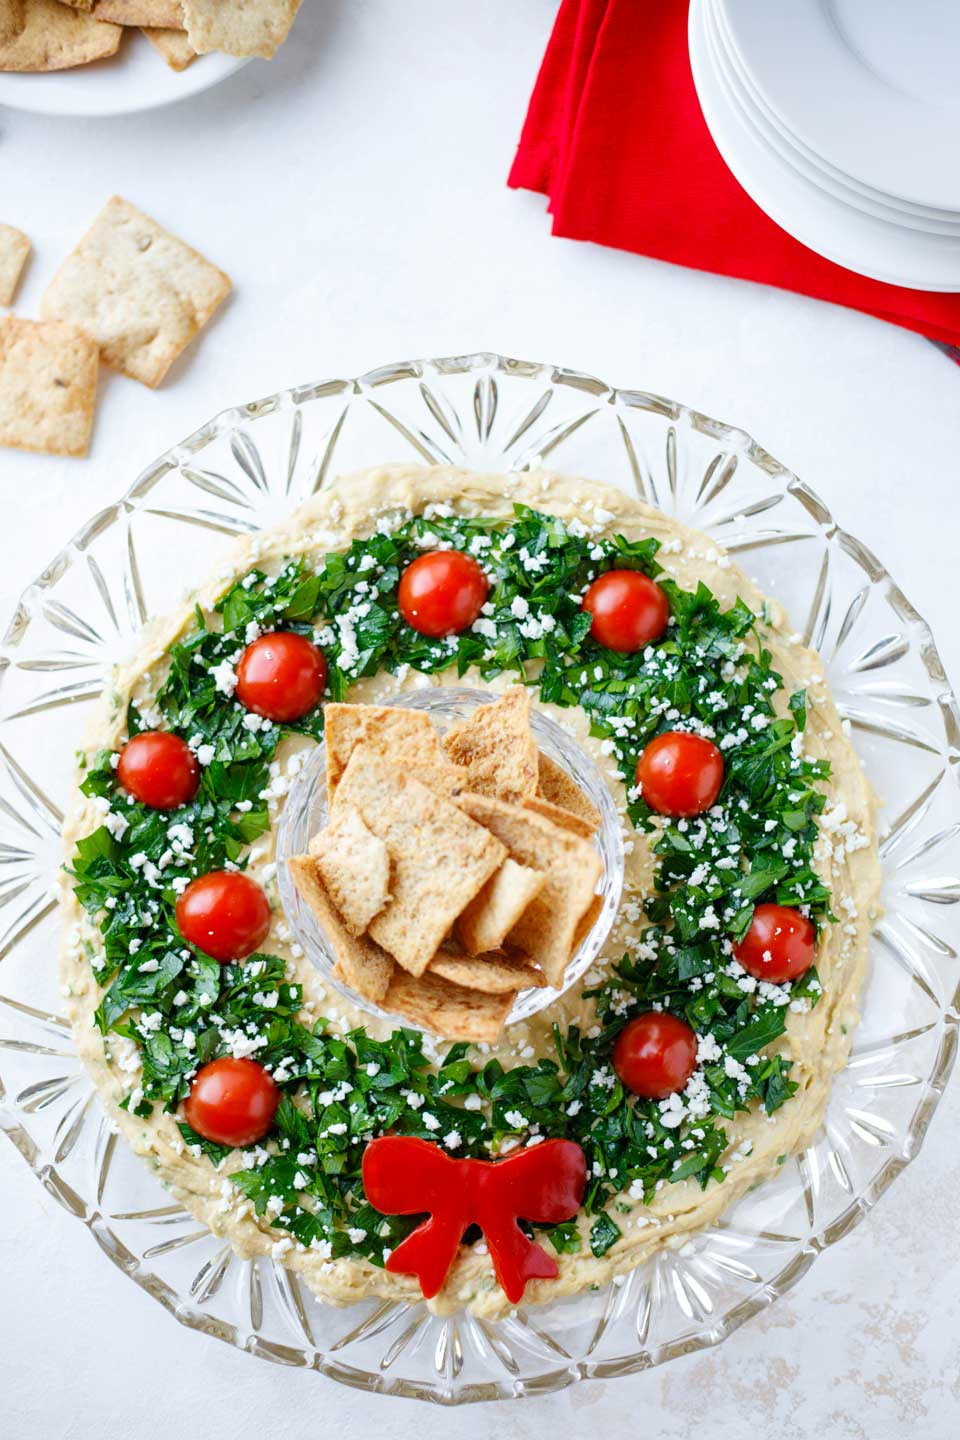 Easy Appetizers For Christmas
 Easy Christmas Appetizer "Hummus Wreath" Two Healthy